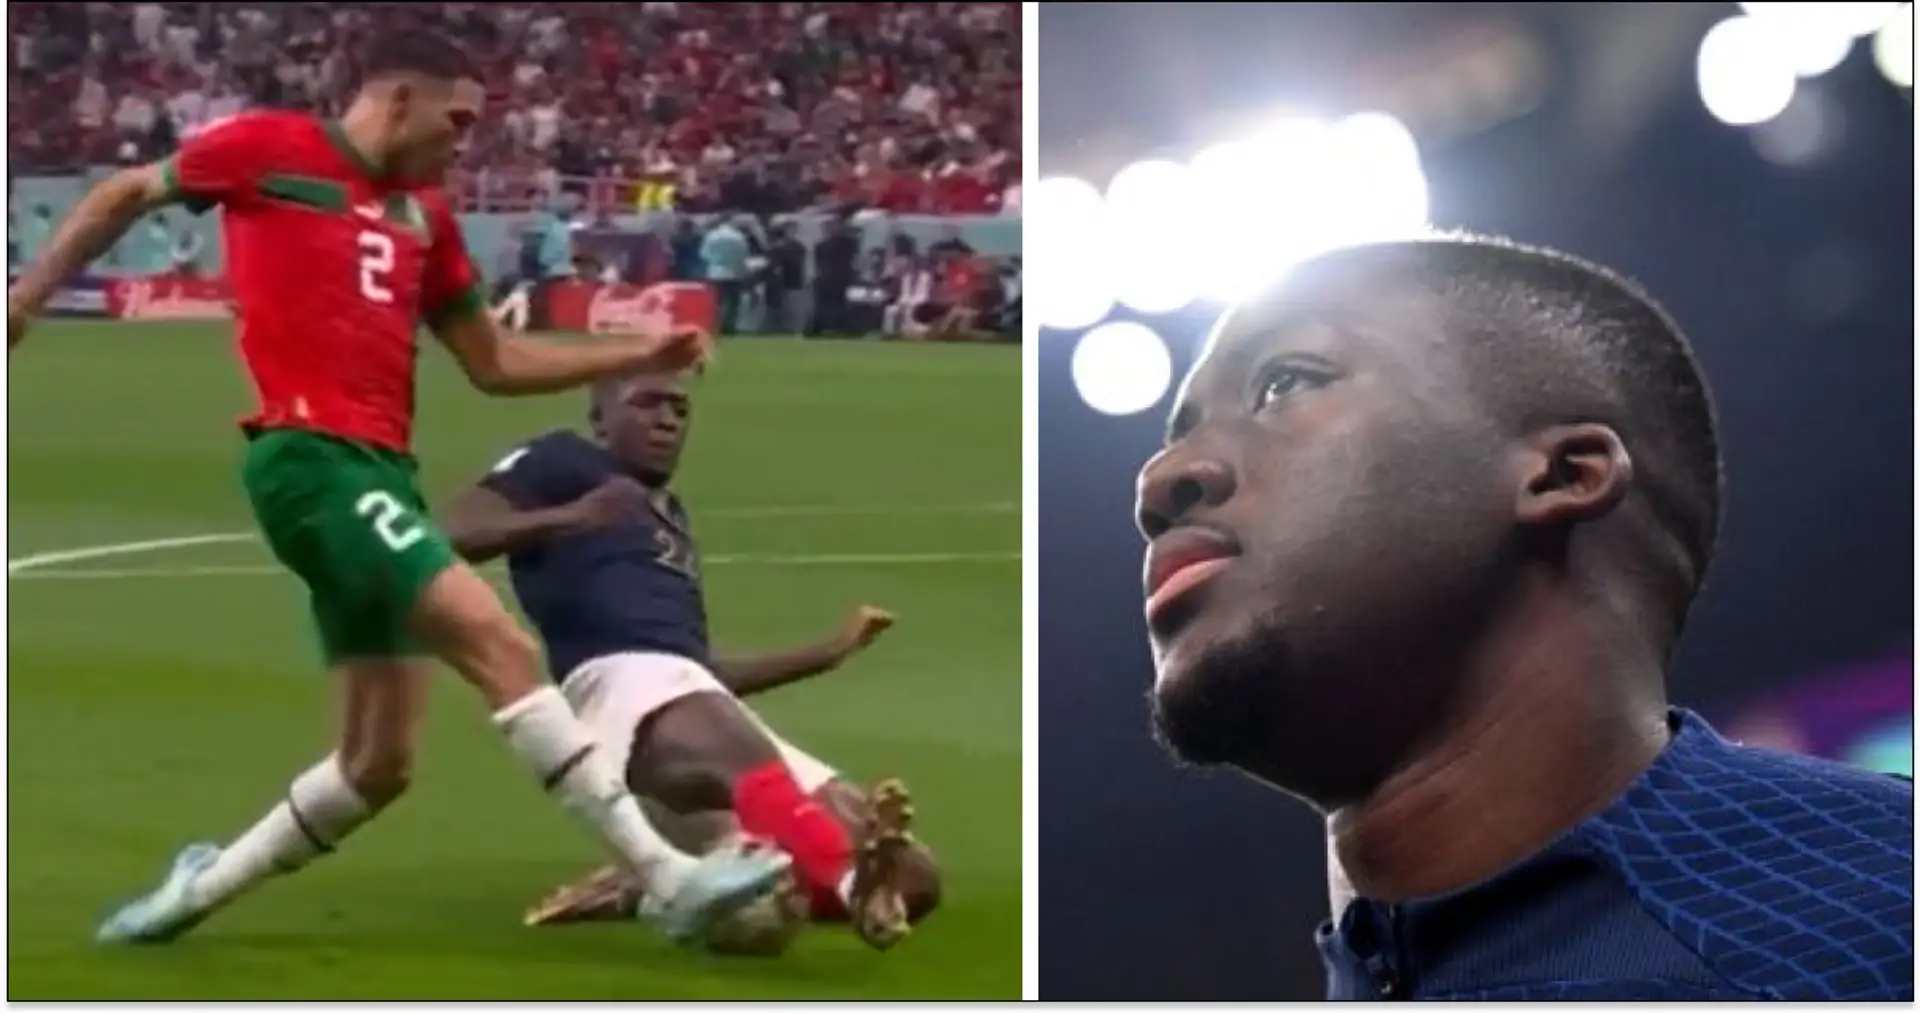 'If Upamecano was on the field this game would have finished with French tears': fans react to Konate's insane performance against Morocco